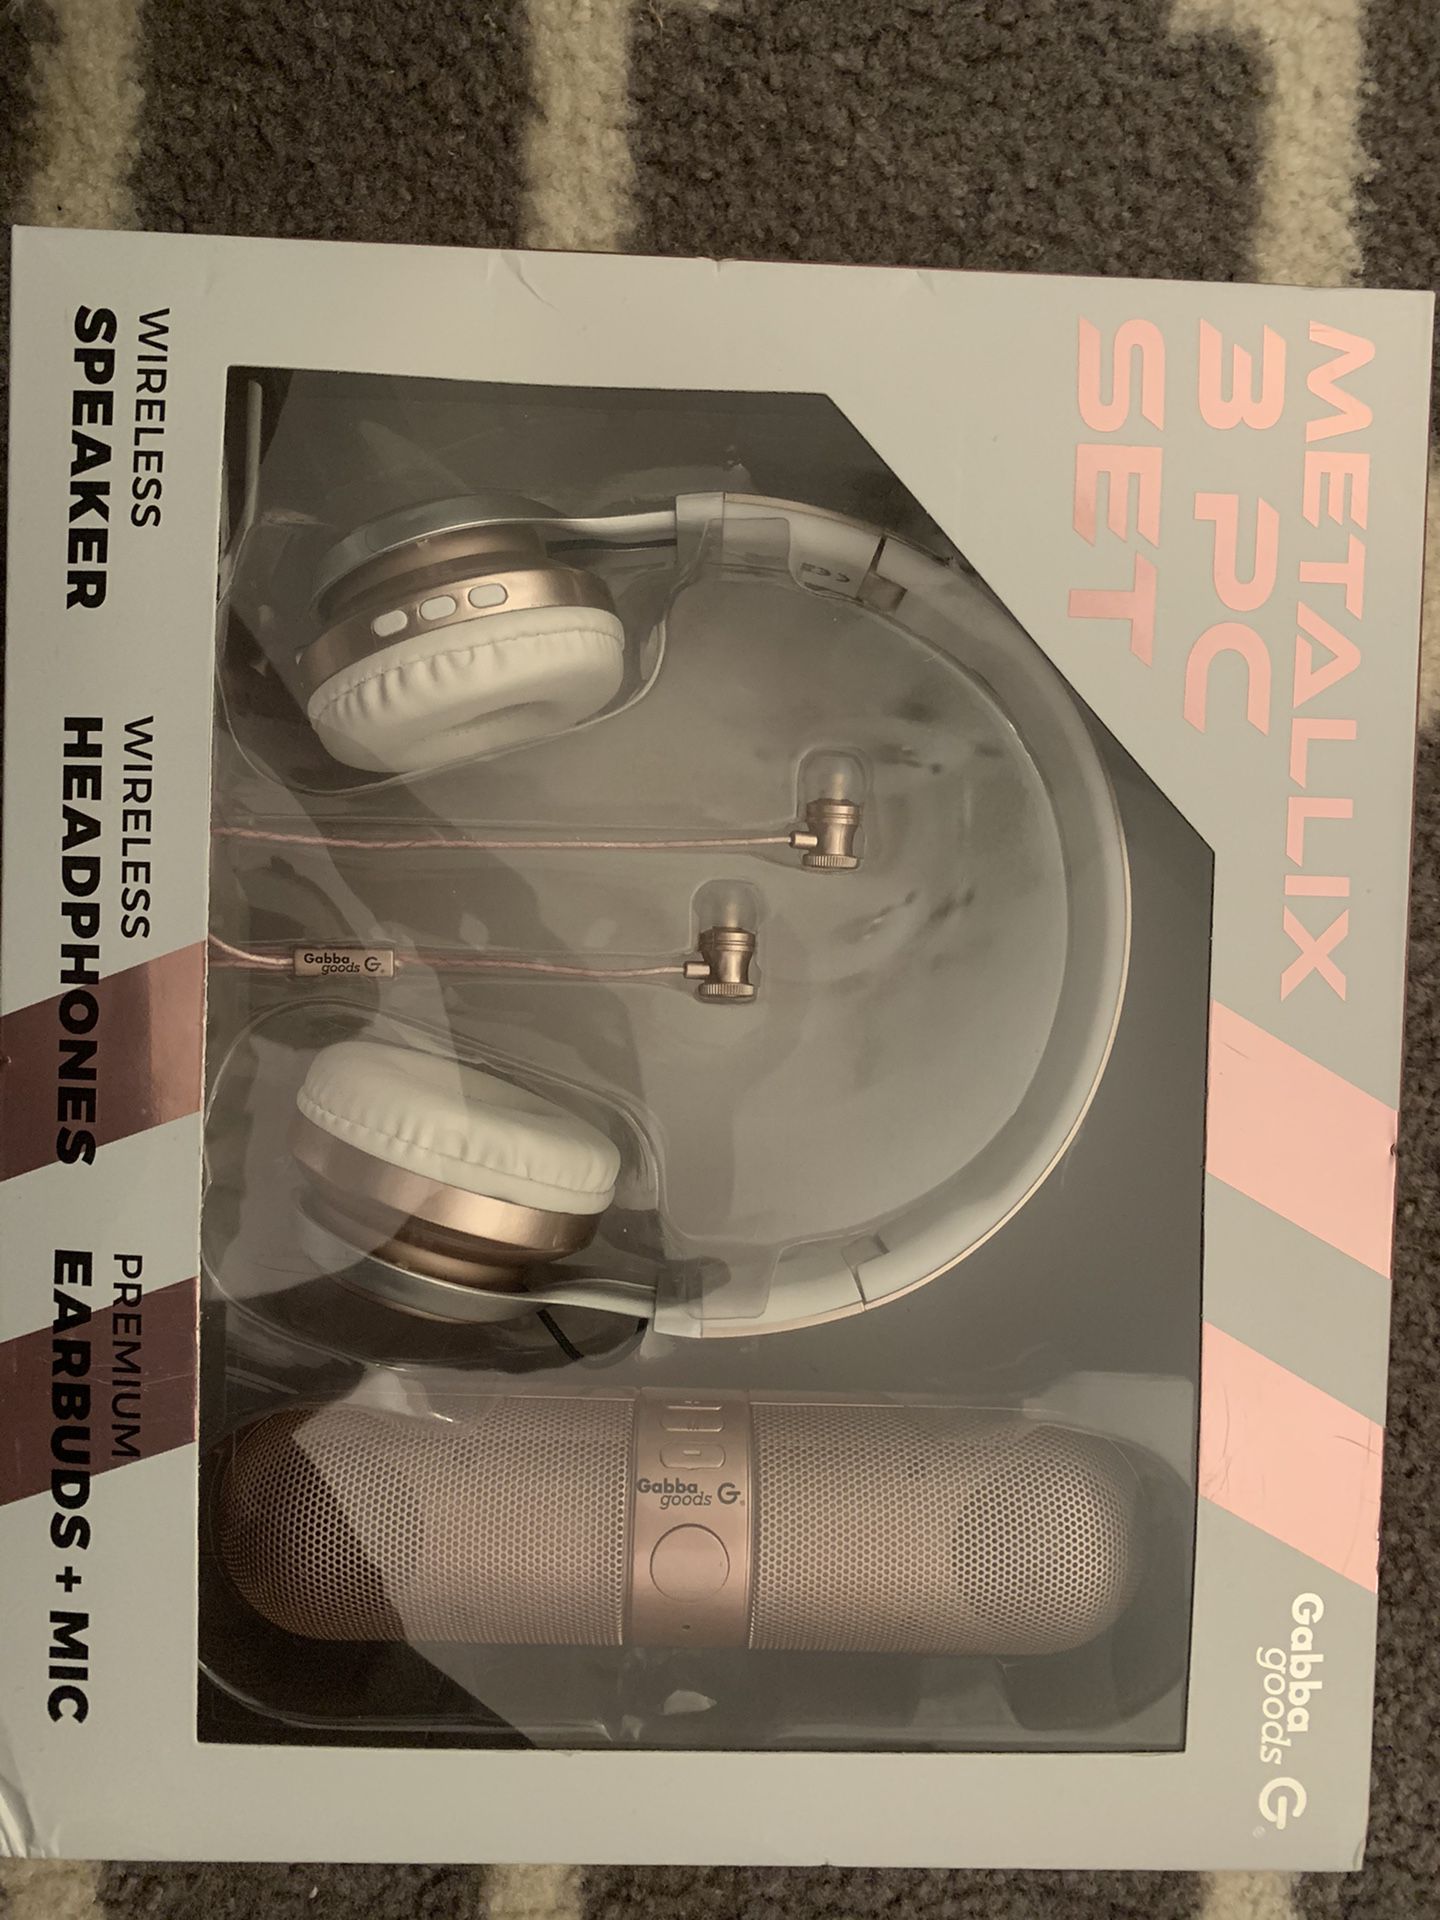 Brand new 3 piece head phone and portable speaker set. New in the box. Rose gold.